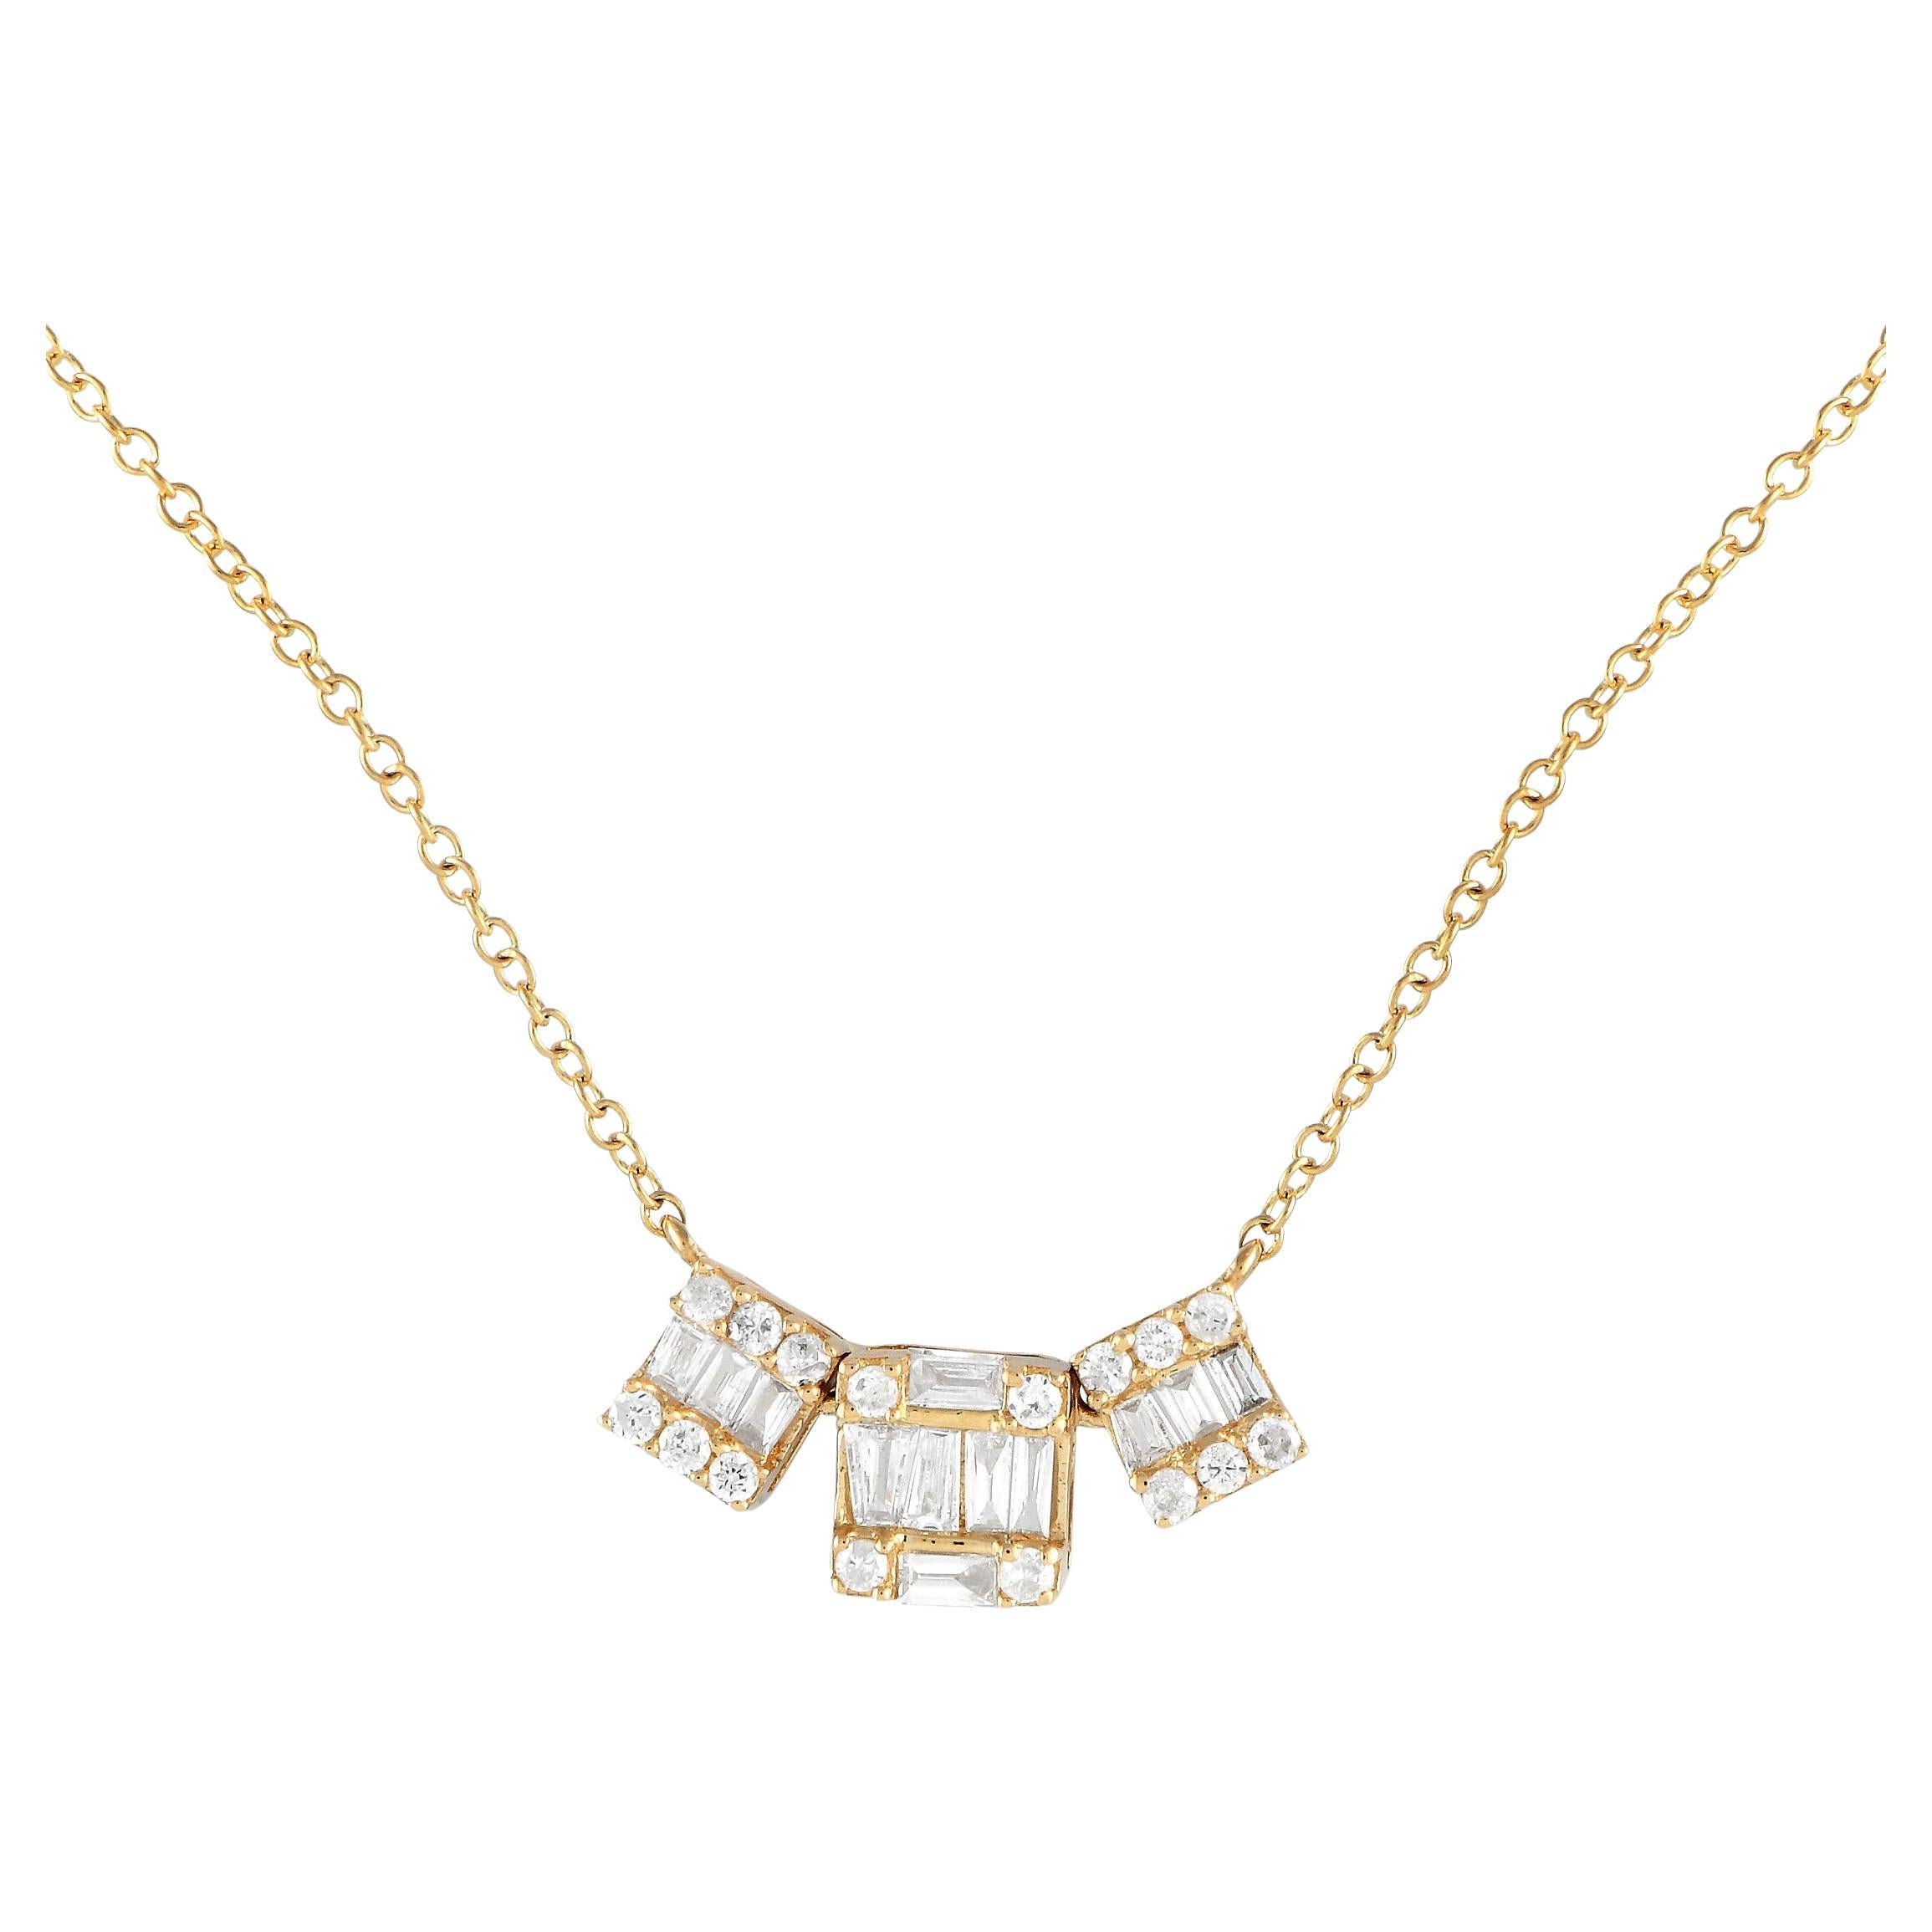 LB Exclusive 14K Yellow Gold 0.20ct Diamond Cluster Necklace PN14844